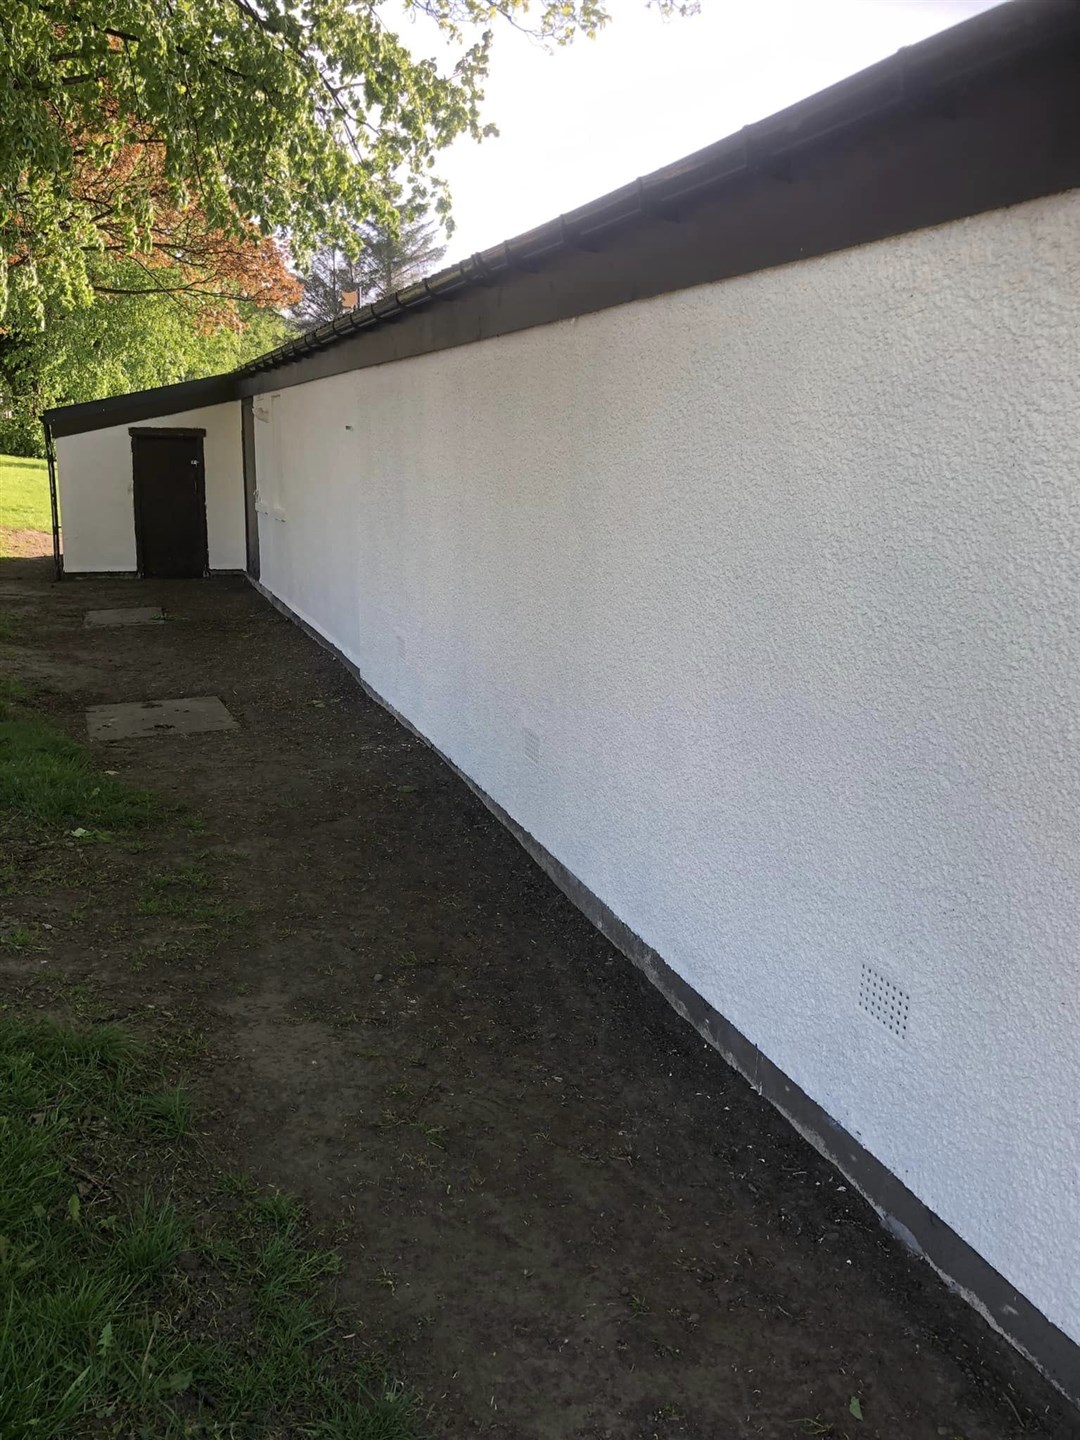 The pavilion after it had been painted at the weekend.